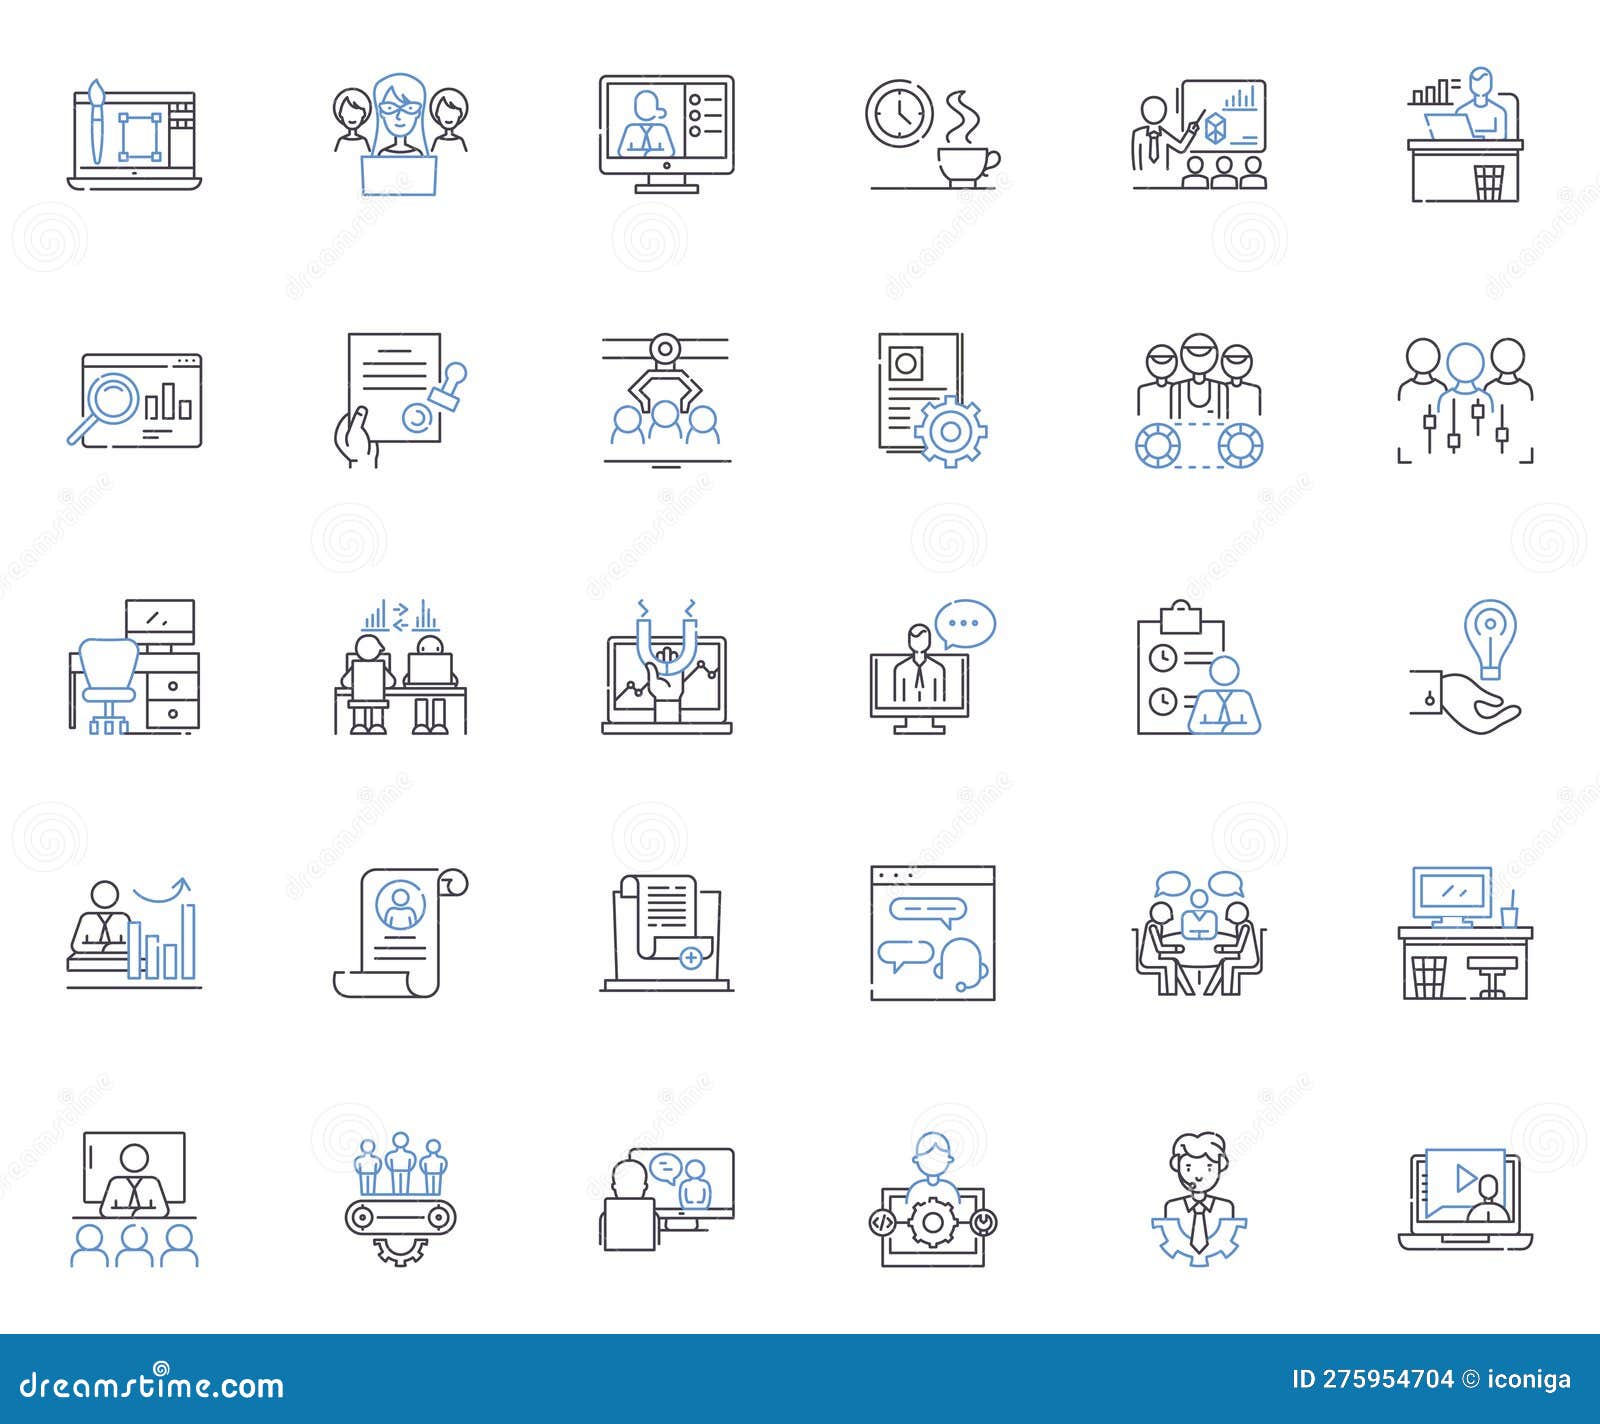 unity harmony line icons collection. cooperation, synergy, accord, balance, oneness, concurrence, alliance  and